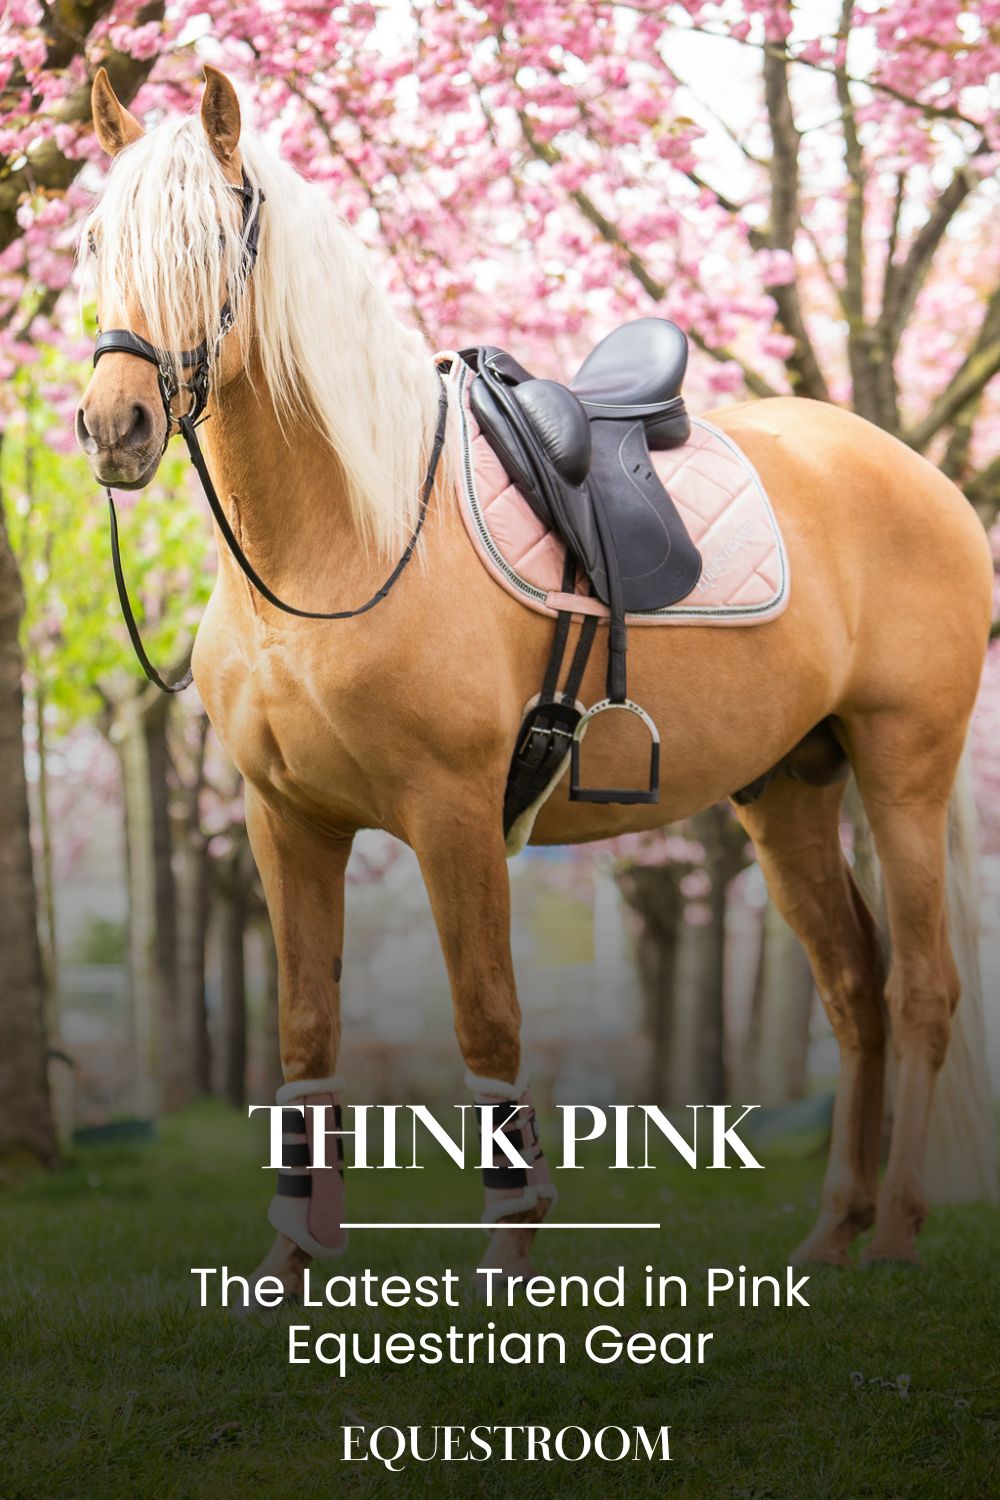 Think Pink: The Latest Trend in Pink Equestrian Gear